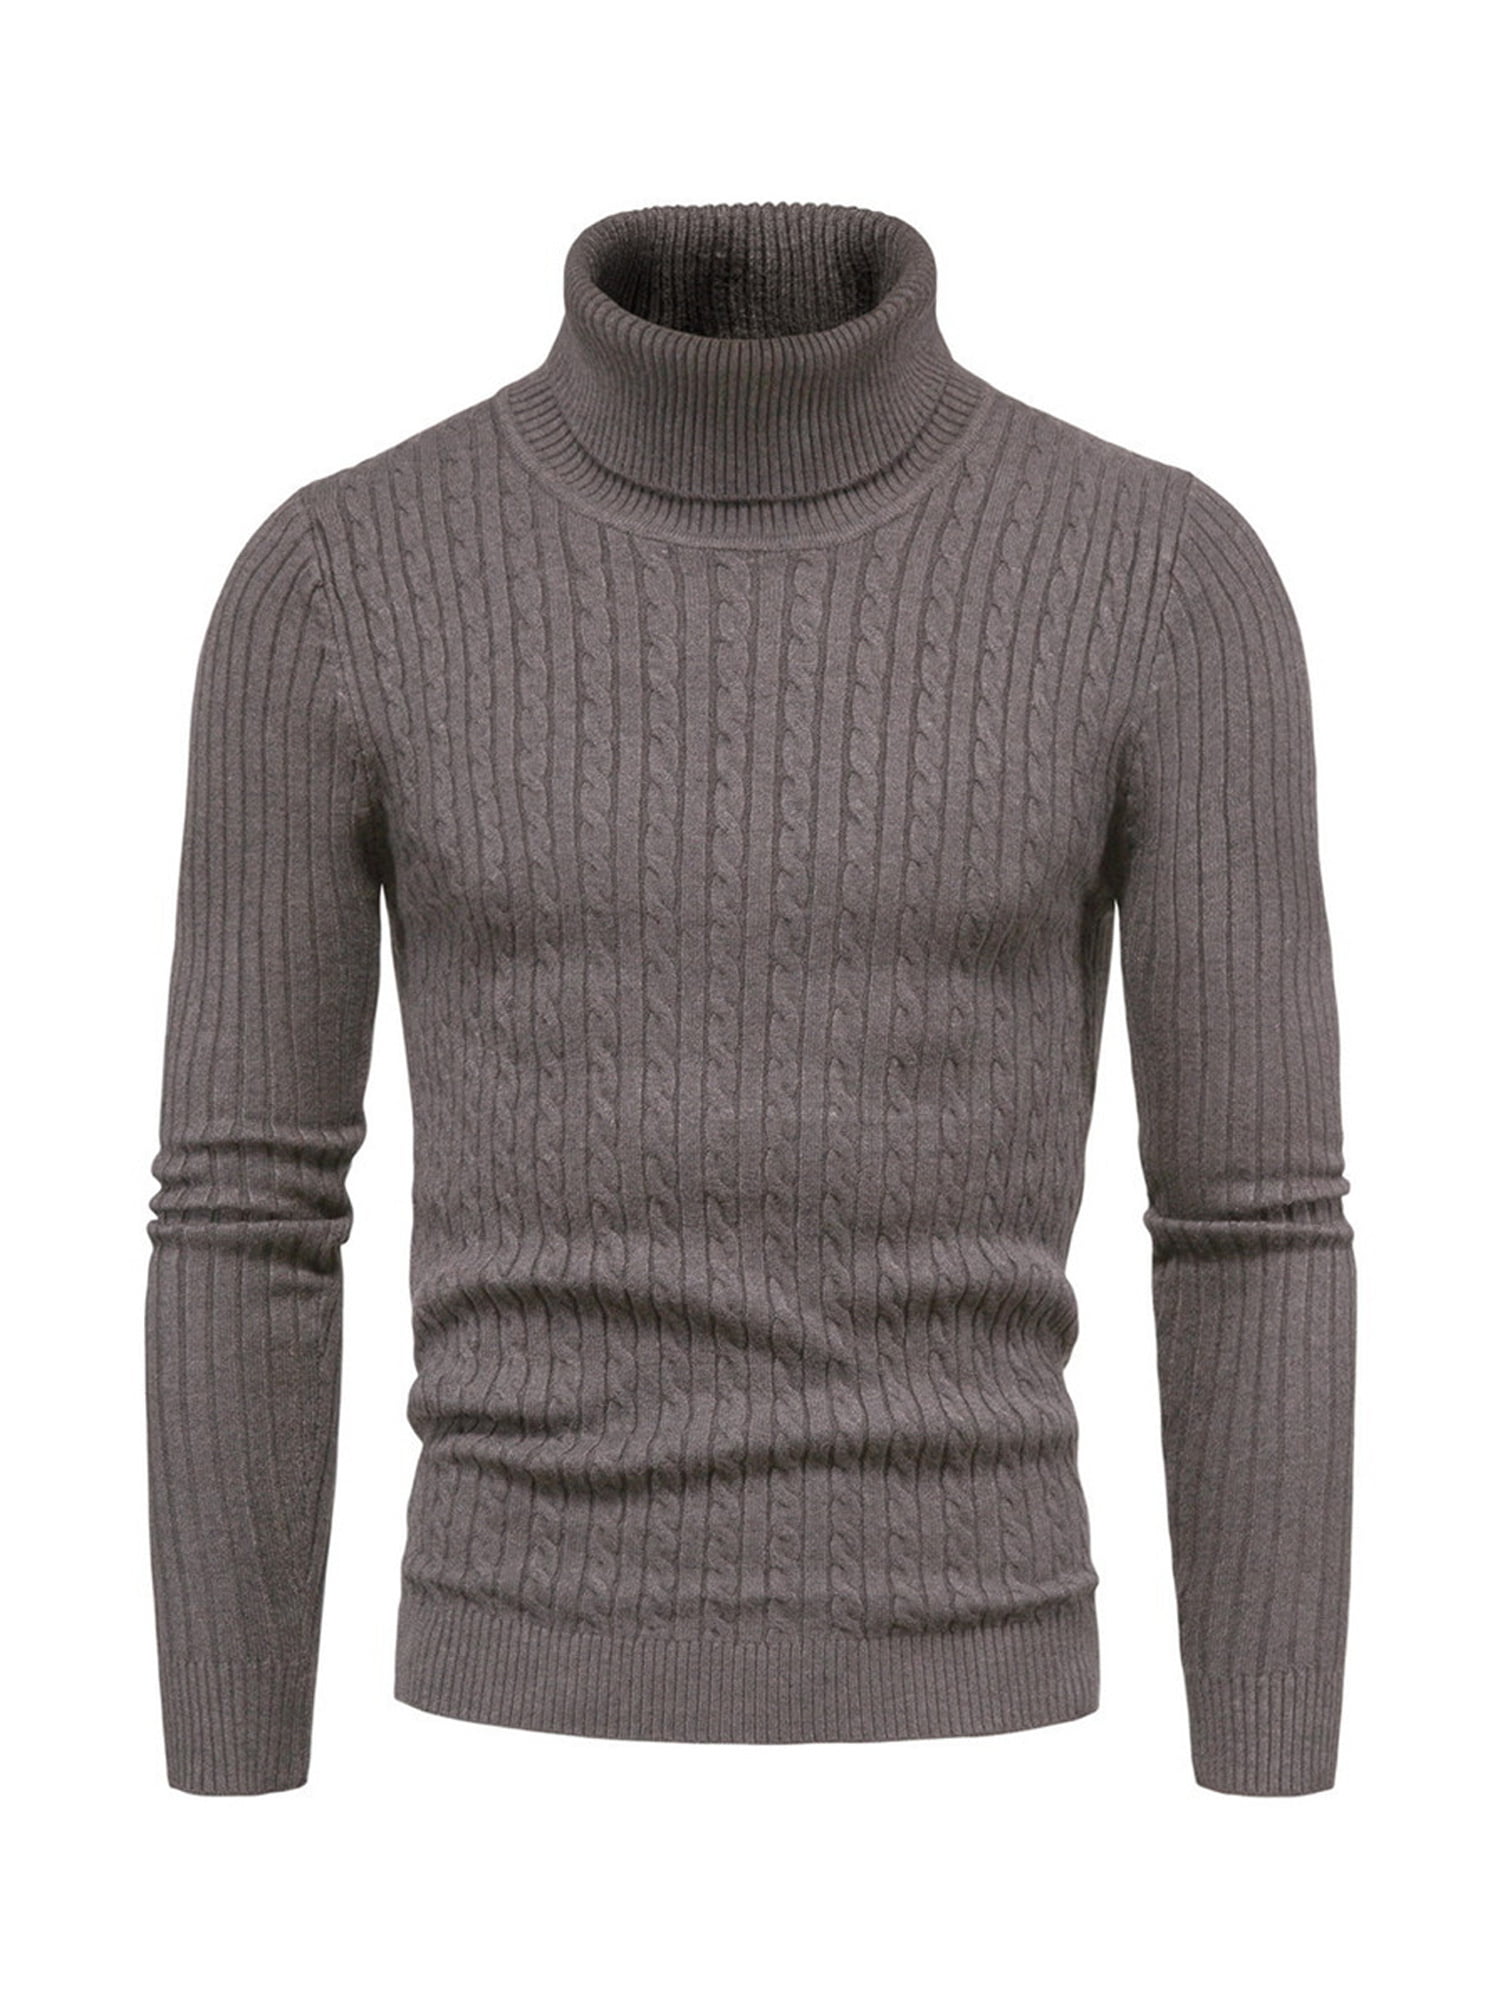 YONGM Mens Slim Turtleneck Pullover Sweaters with Twist Patterned